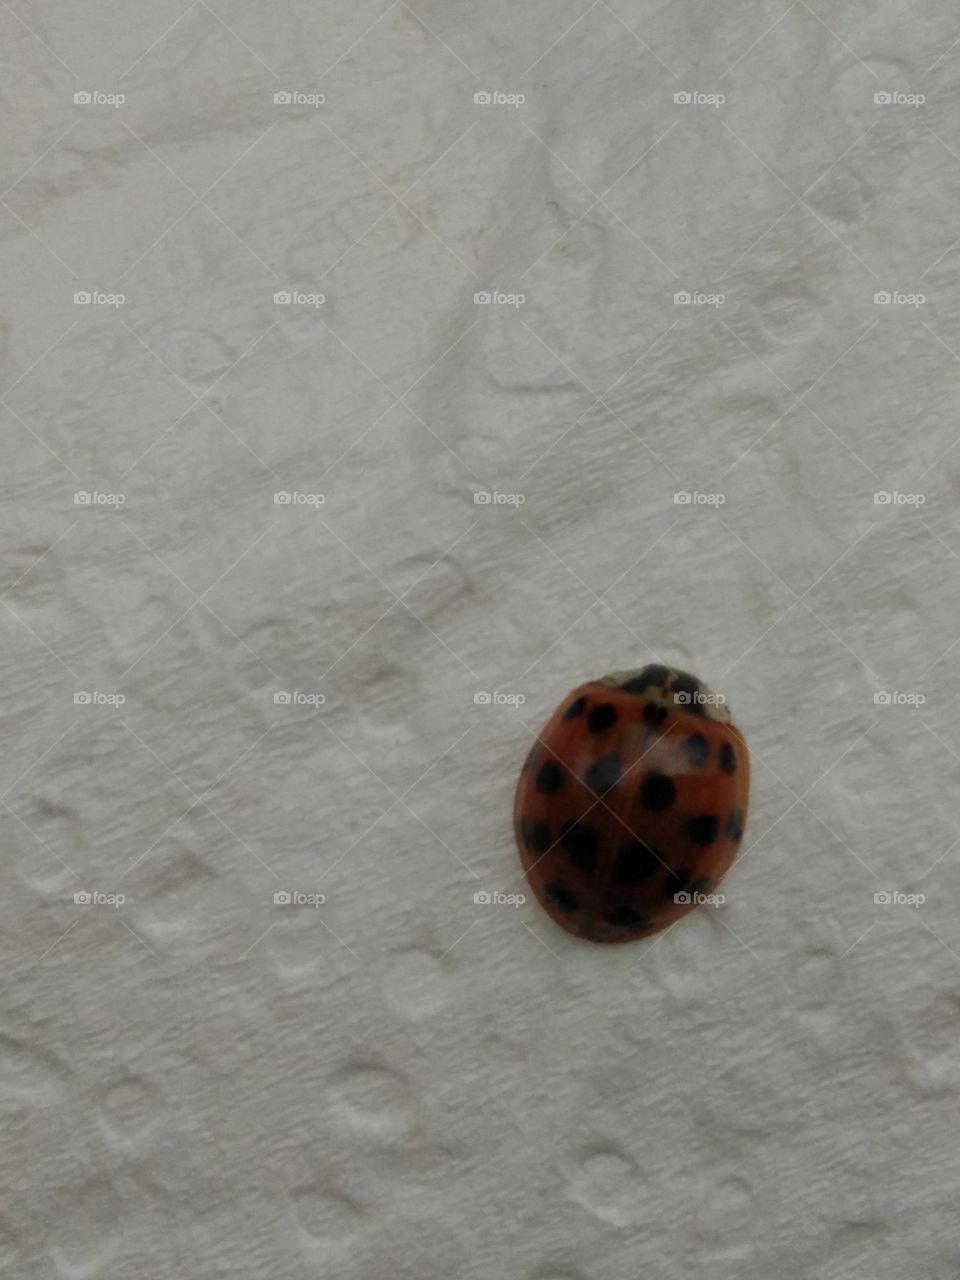 Ladybug shooted in a paper sheet